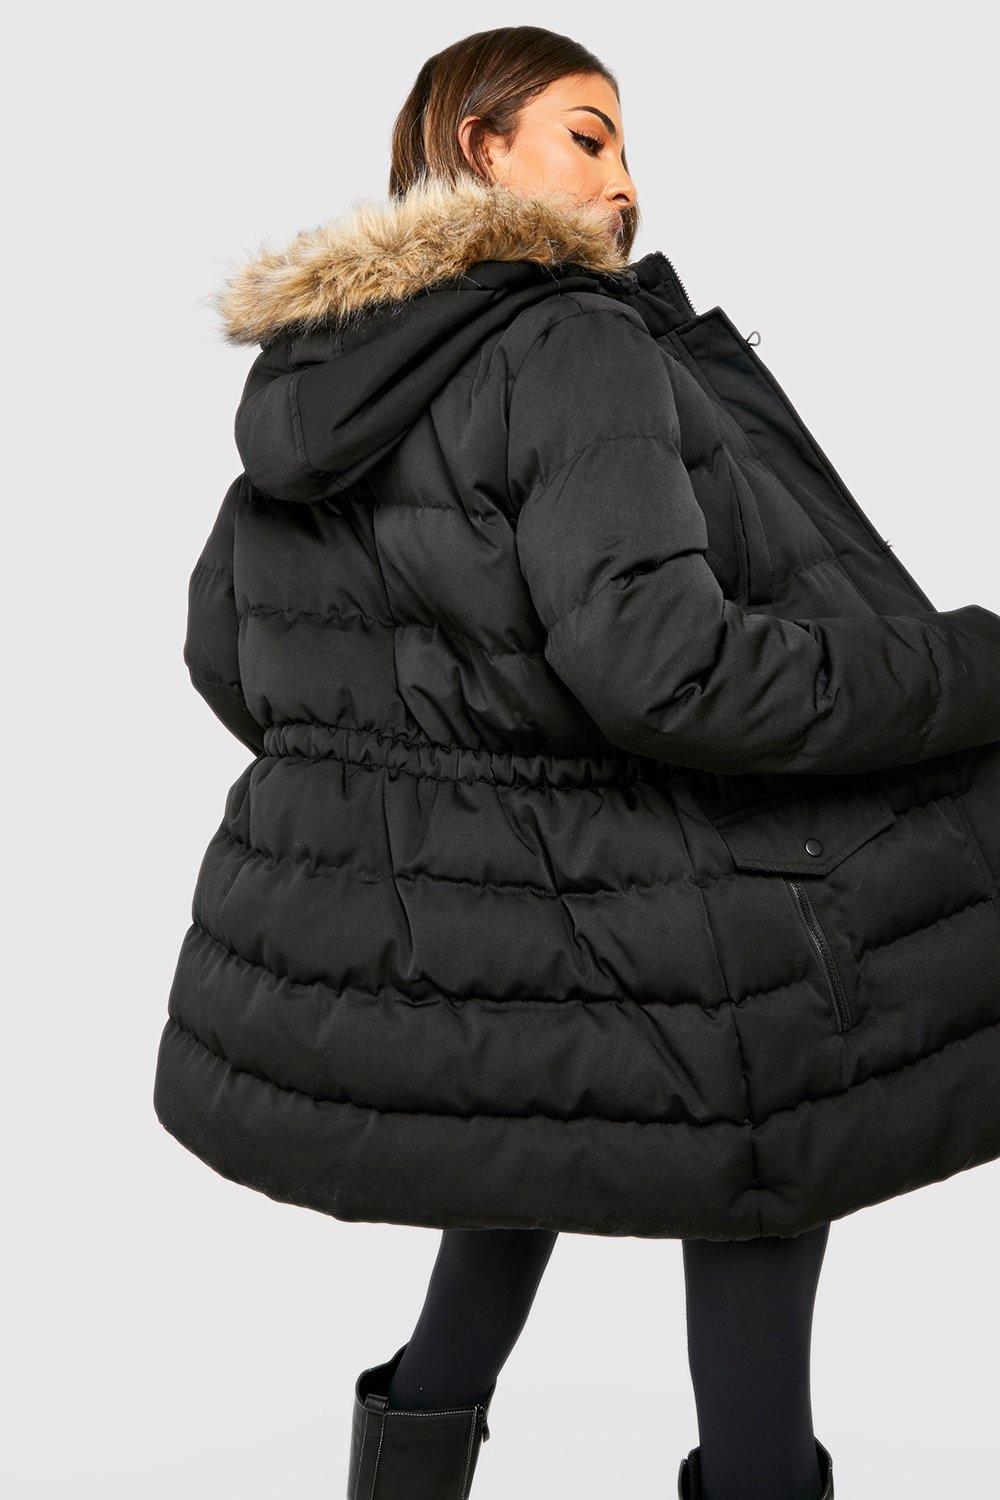 Claire duurzame grondstof snap Luxe Berg Parka Jas | boohoo